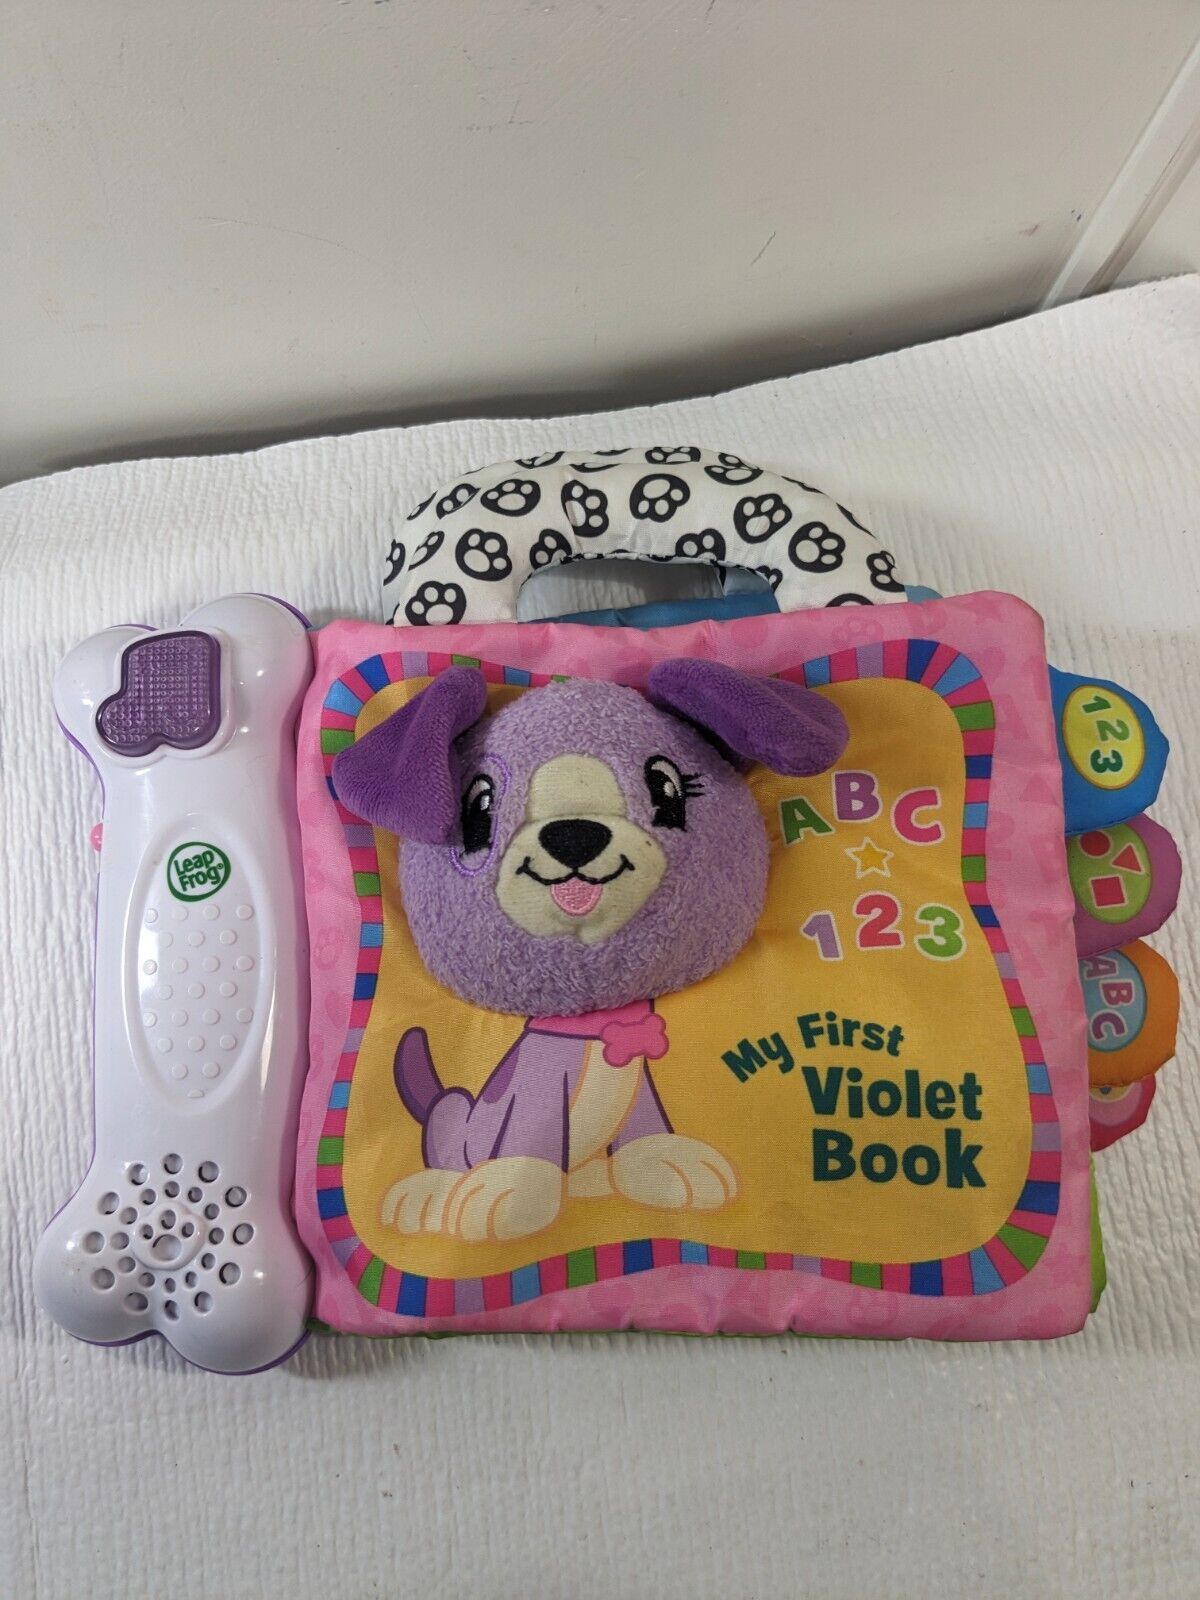 Leap Frog My First Violet Book Soft Electonic baby toy ABC 123 Music leapfrog - $37.00